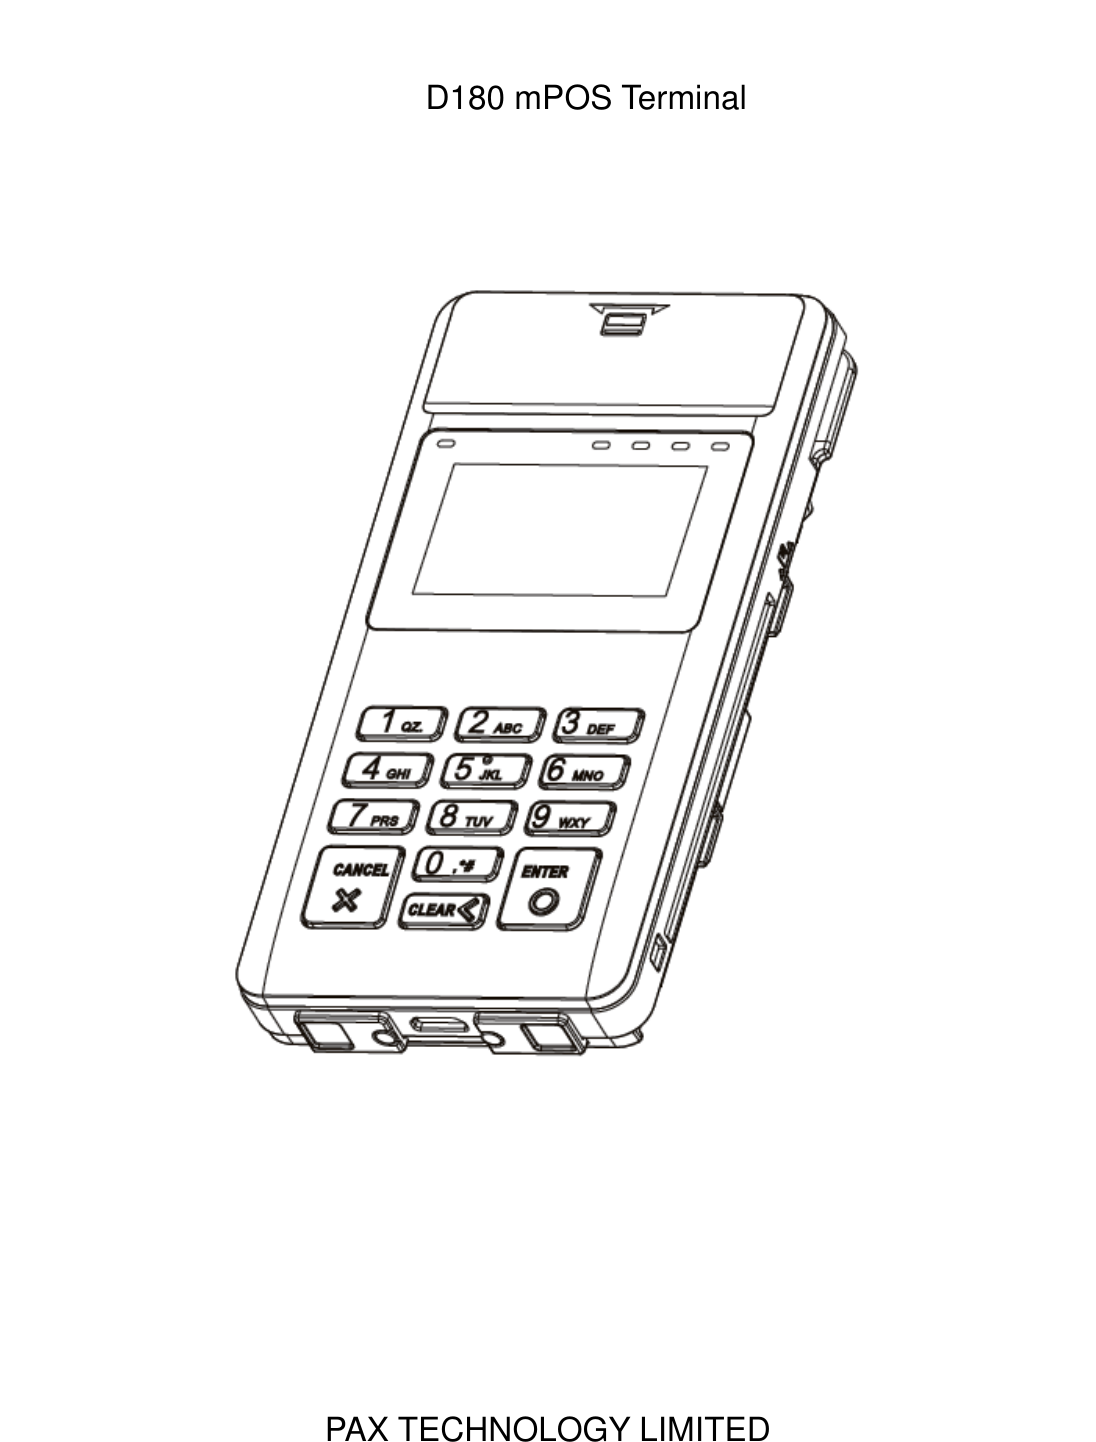   D180 mPOS Terminal         PAX TECHNOLOGY LIMITED  